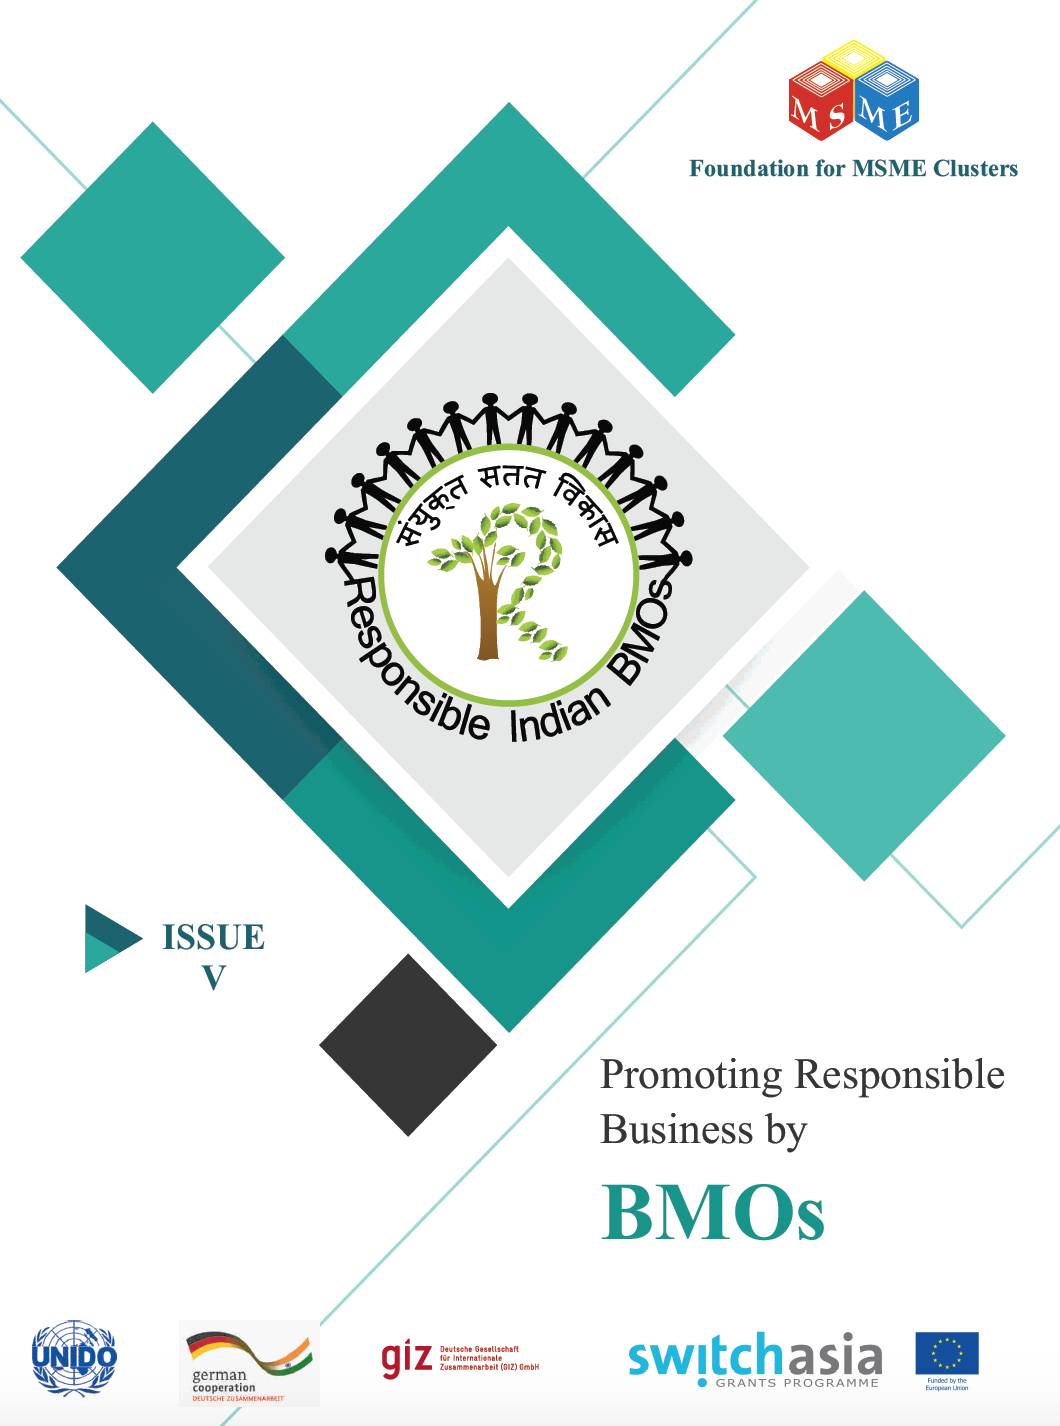 Promoting Responsible Business by BMOs